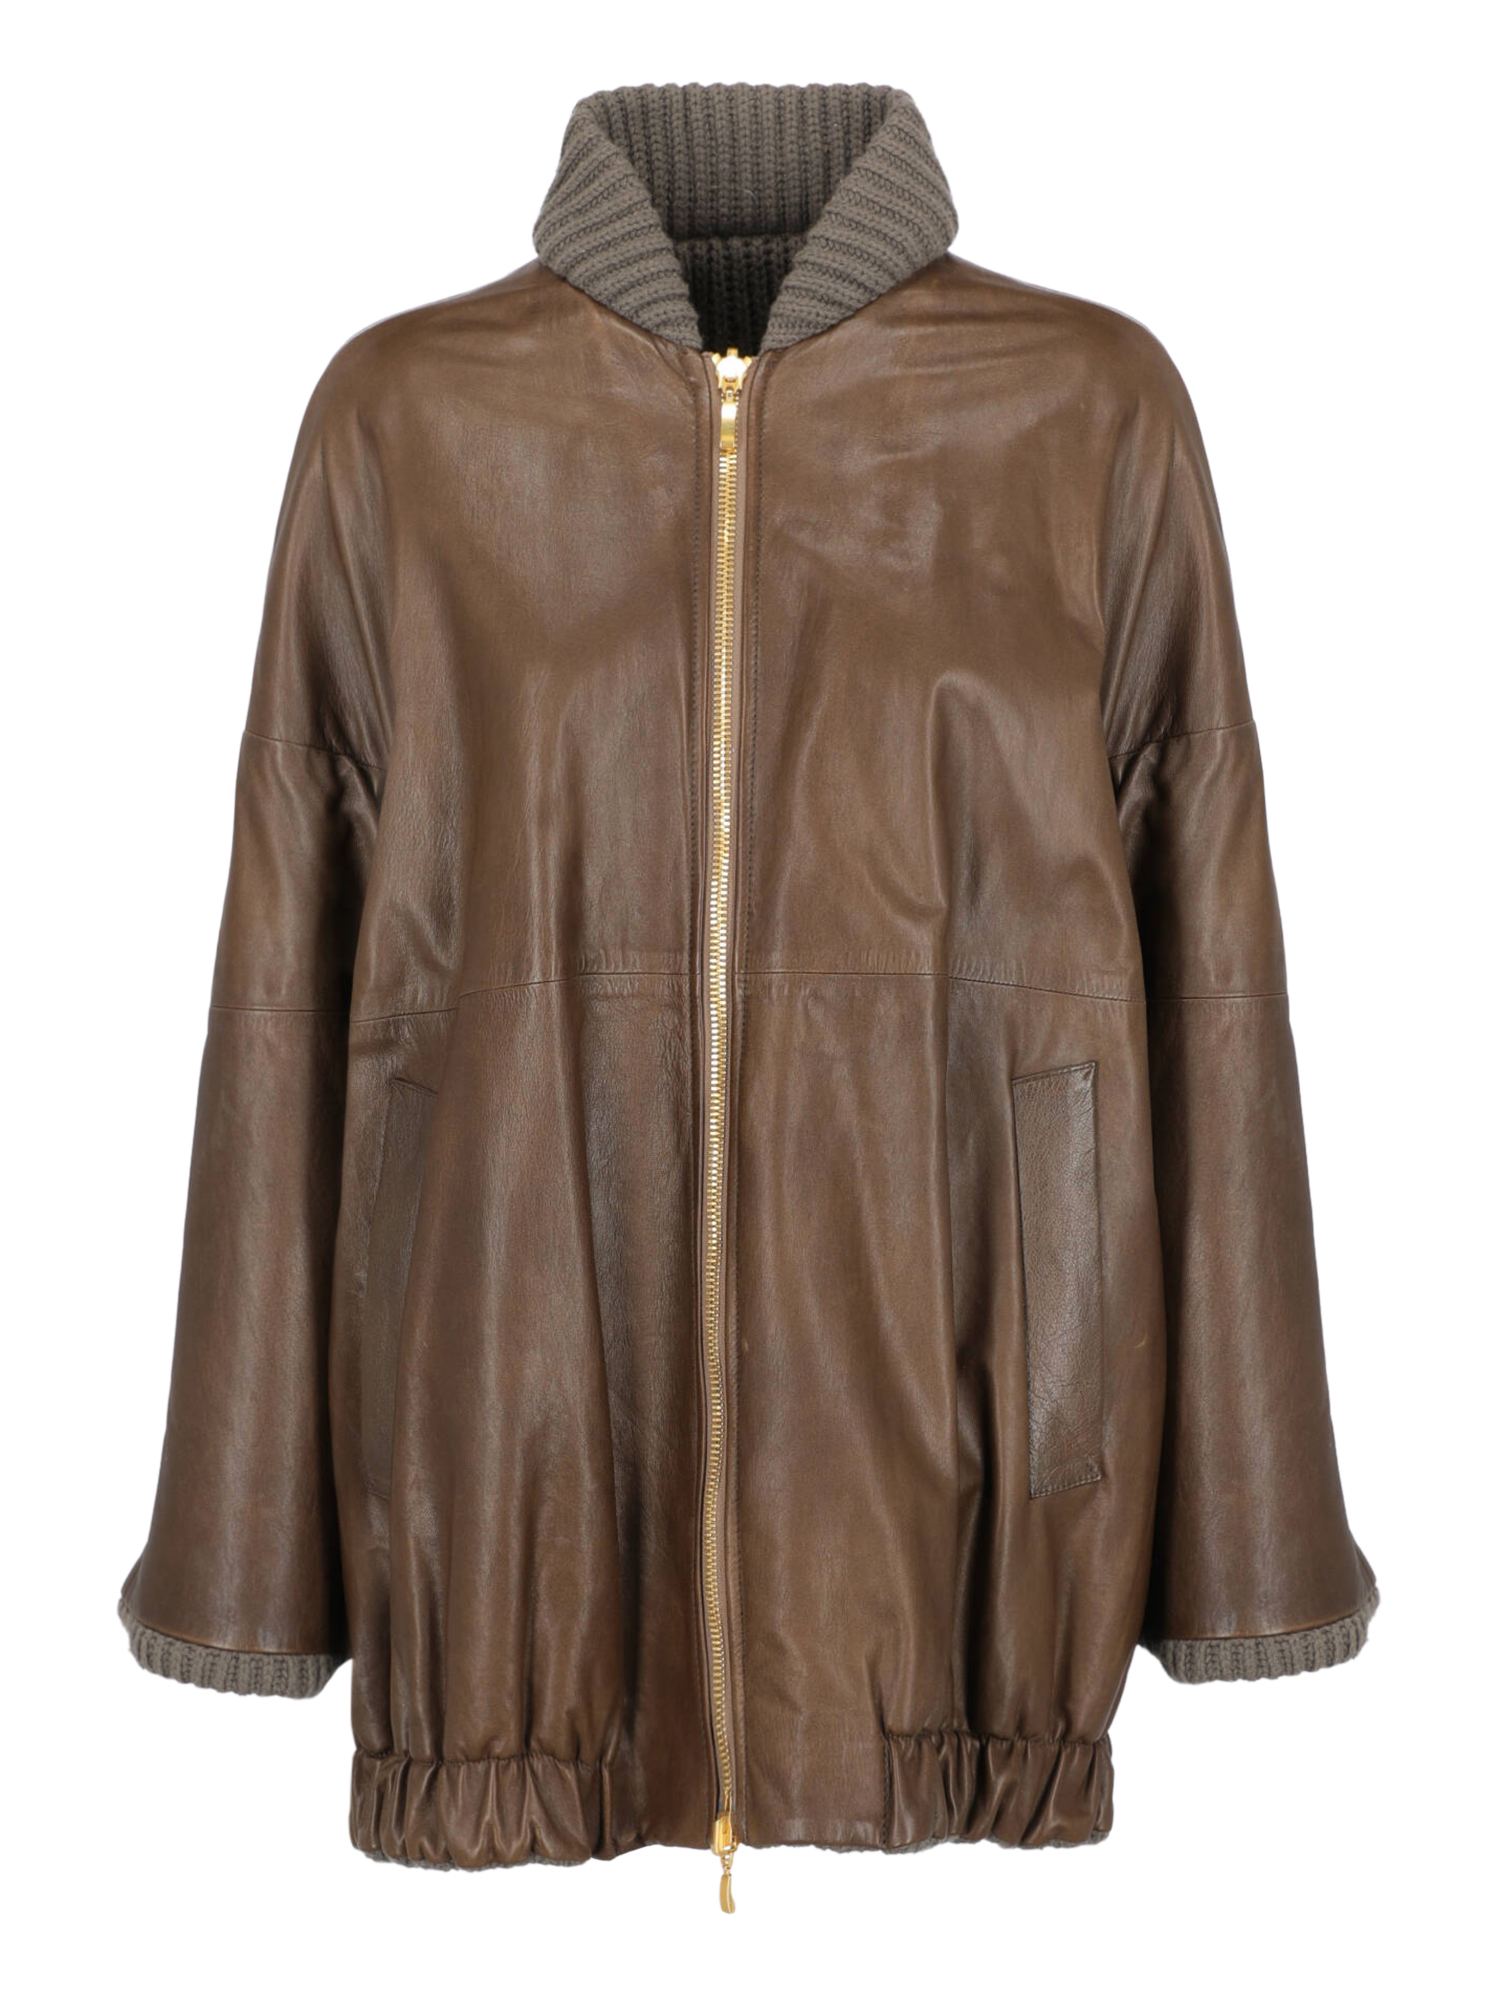 Condition: Very Good, Solid Color Leather, Wool, Color: Brown - XS - IT 38 -